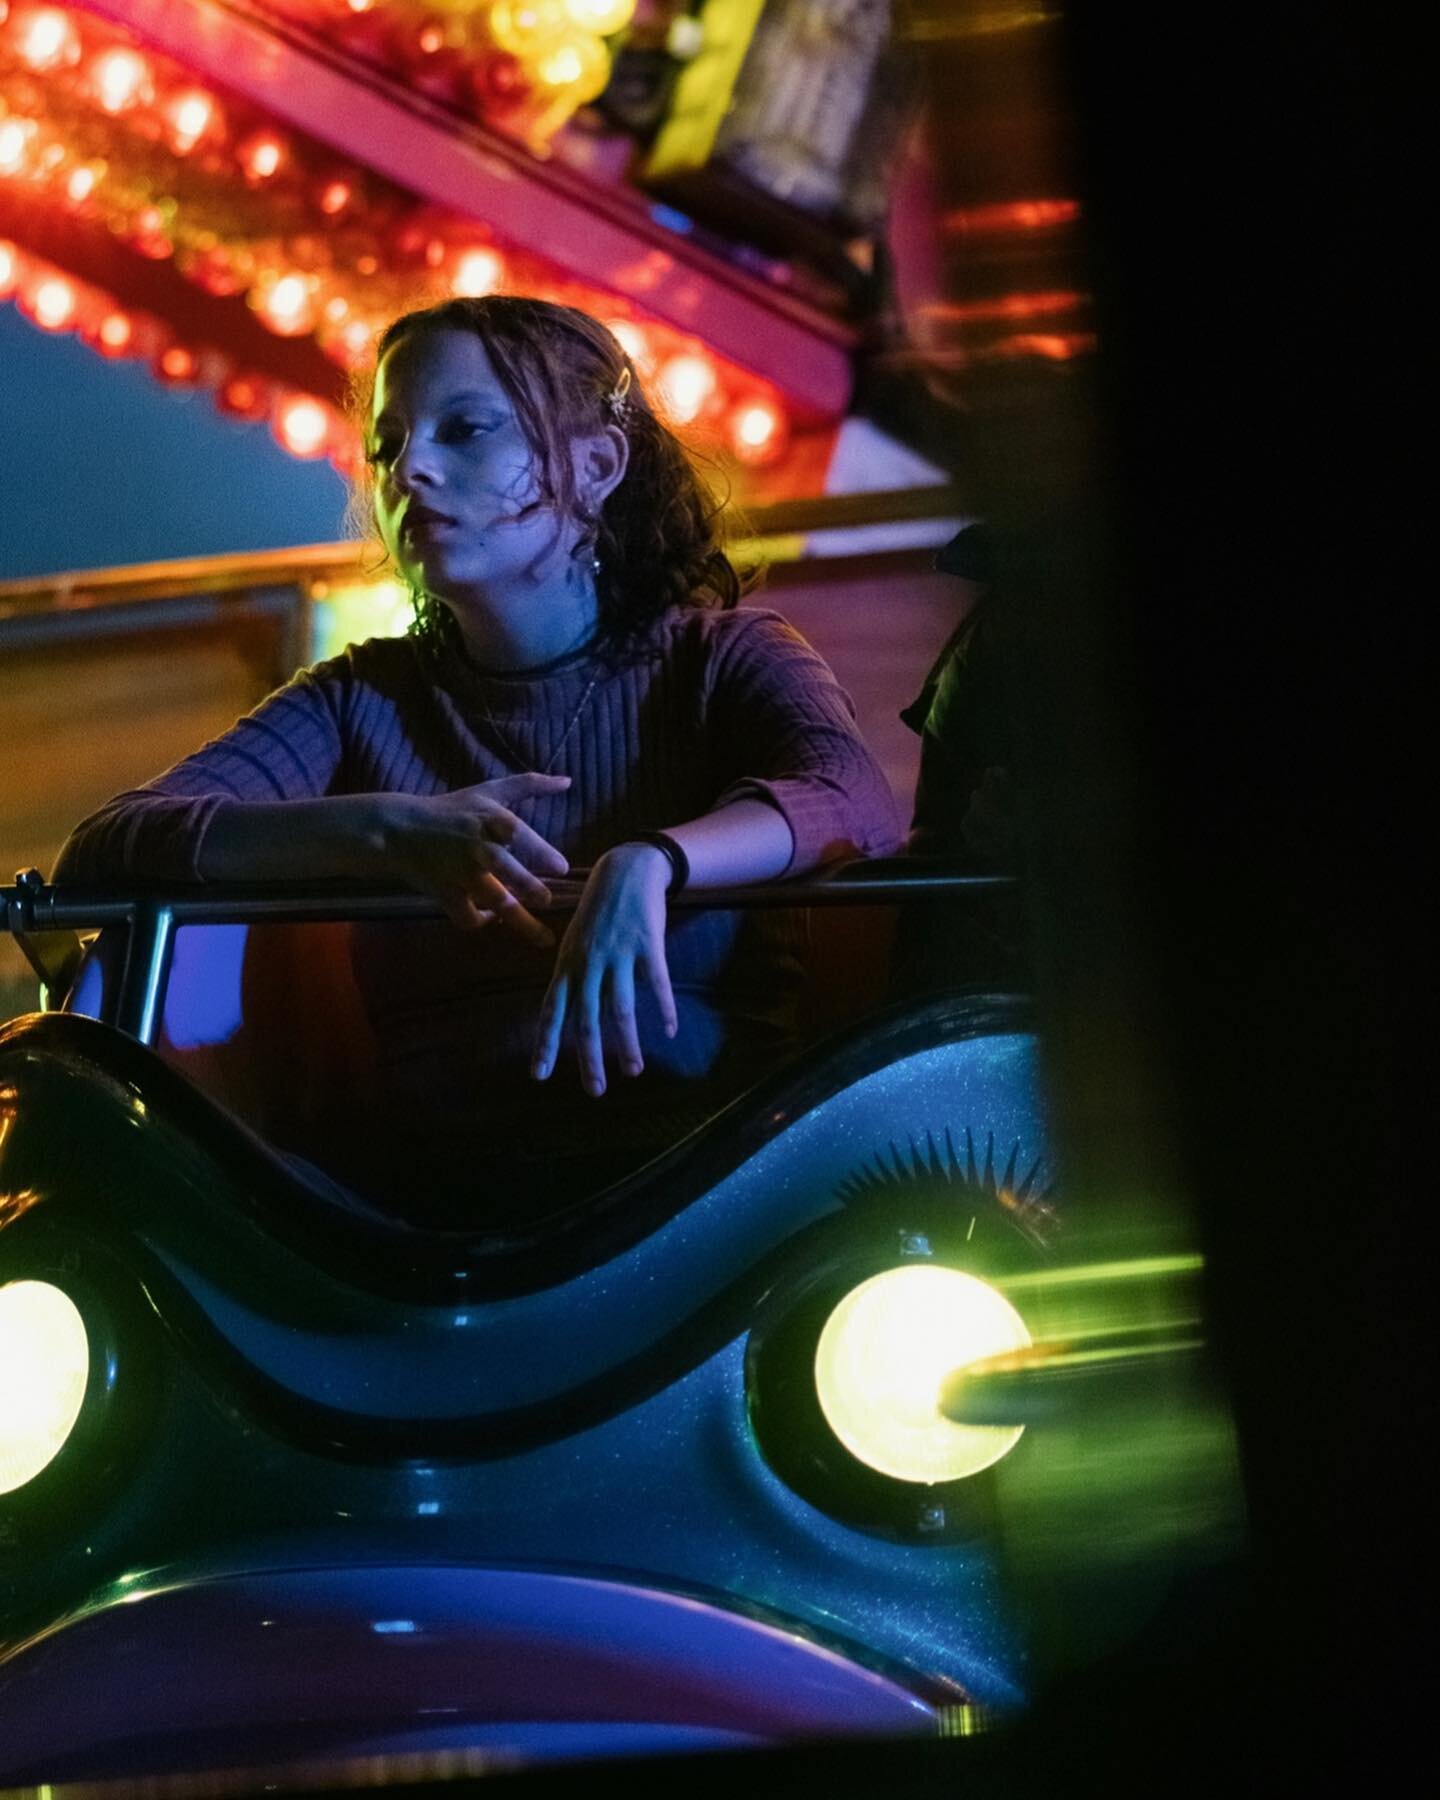 At the fair, 2019-2022.
.
I watched &lsquo;Dazed and Confused&rsquo; a few days before I went to my first fair as a photographer and I cant help but think it must&rsquo;ve influenced me. To me, the movie was not nostalgic in a sweet and comforting se